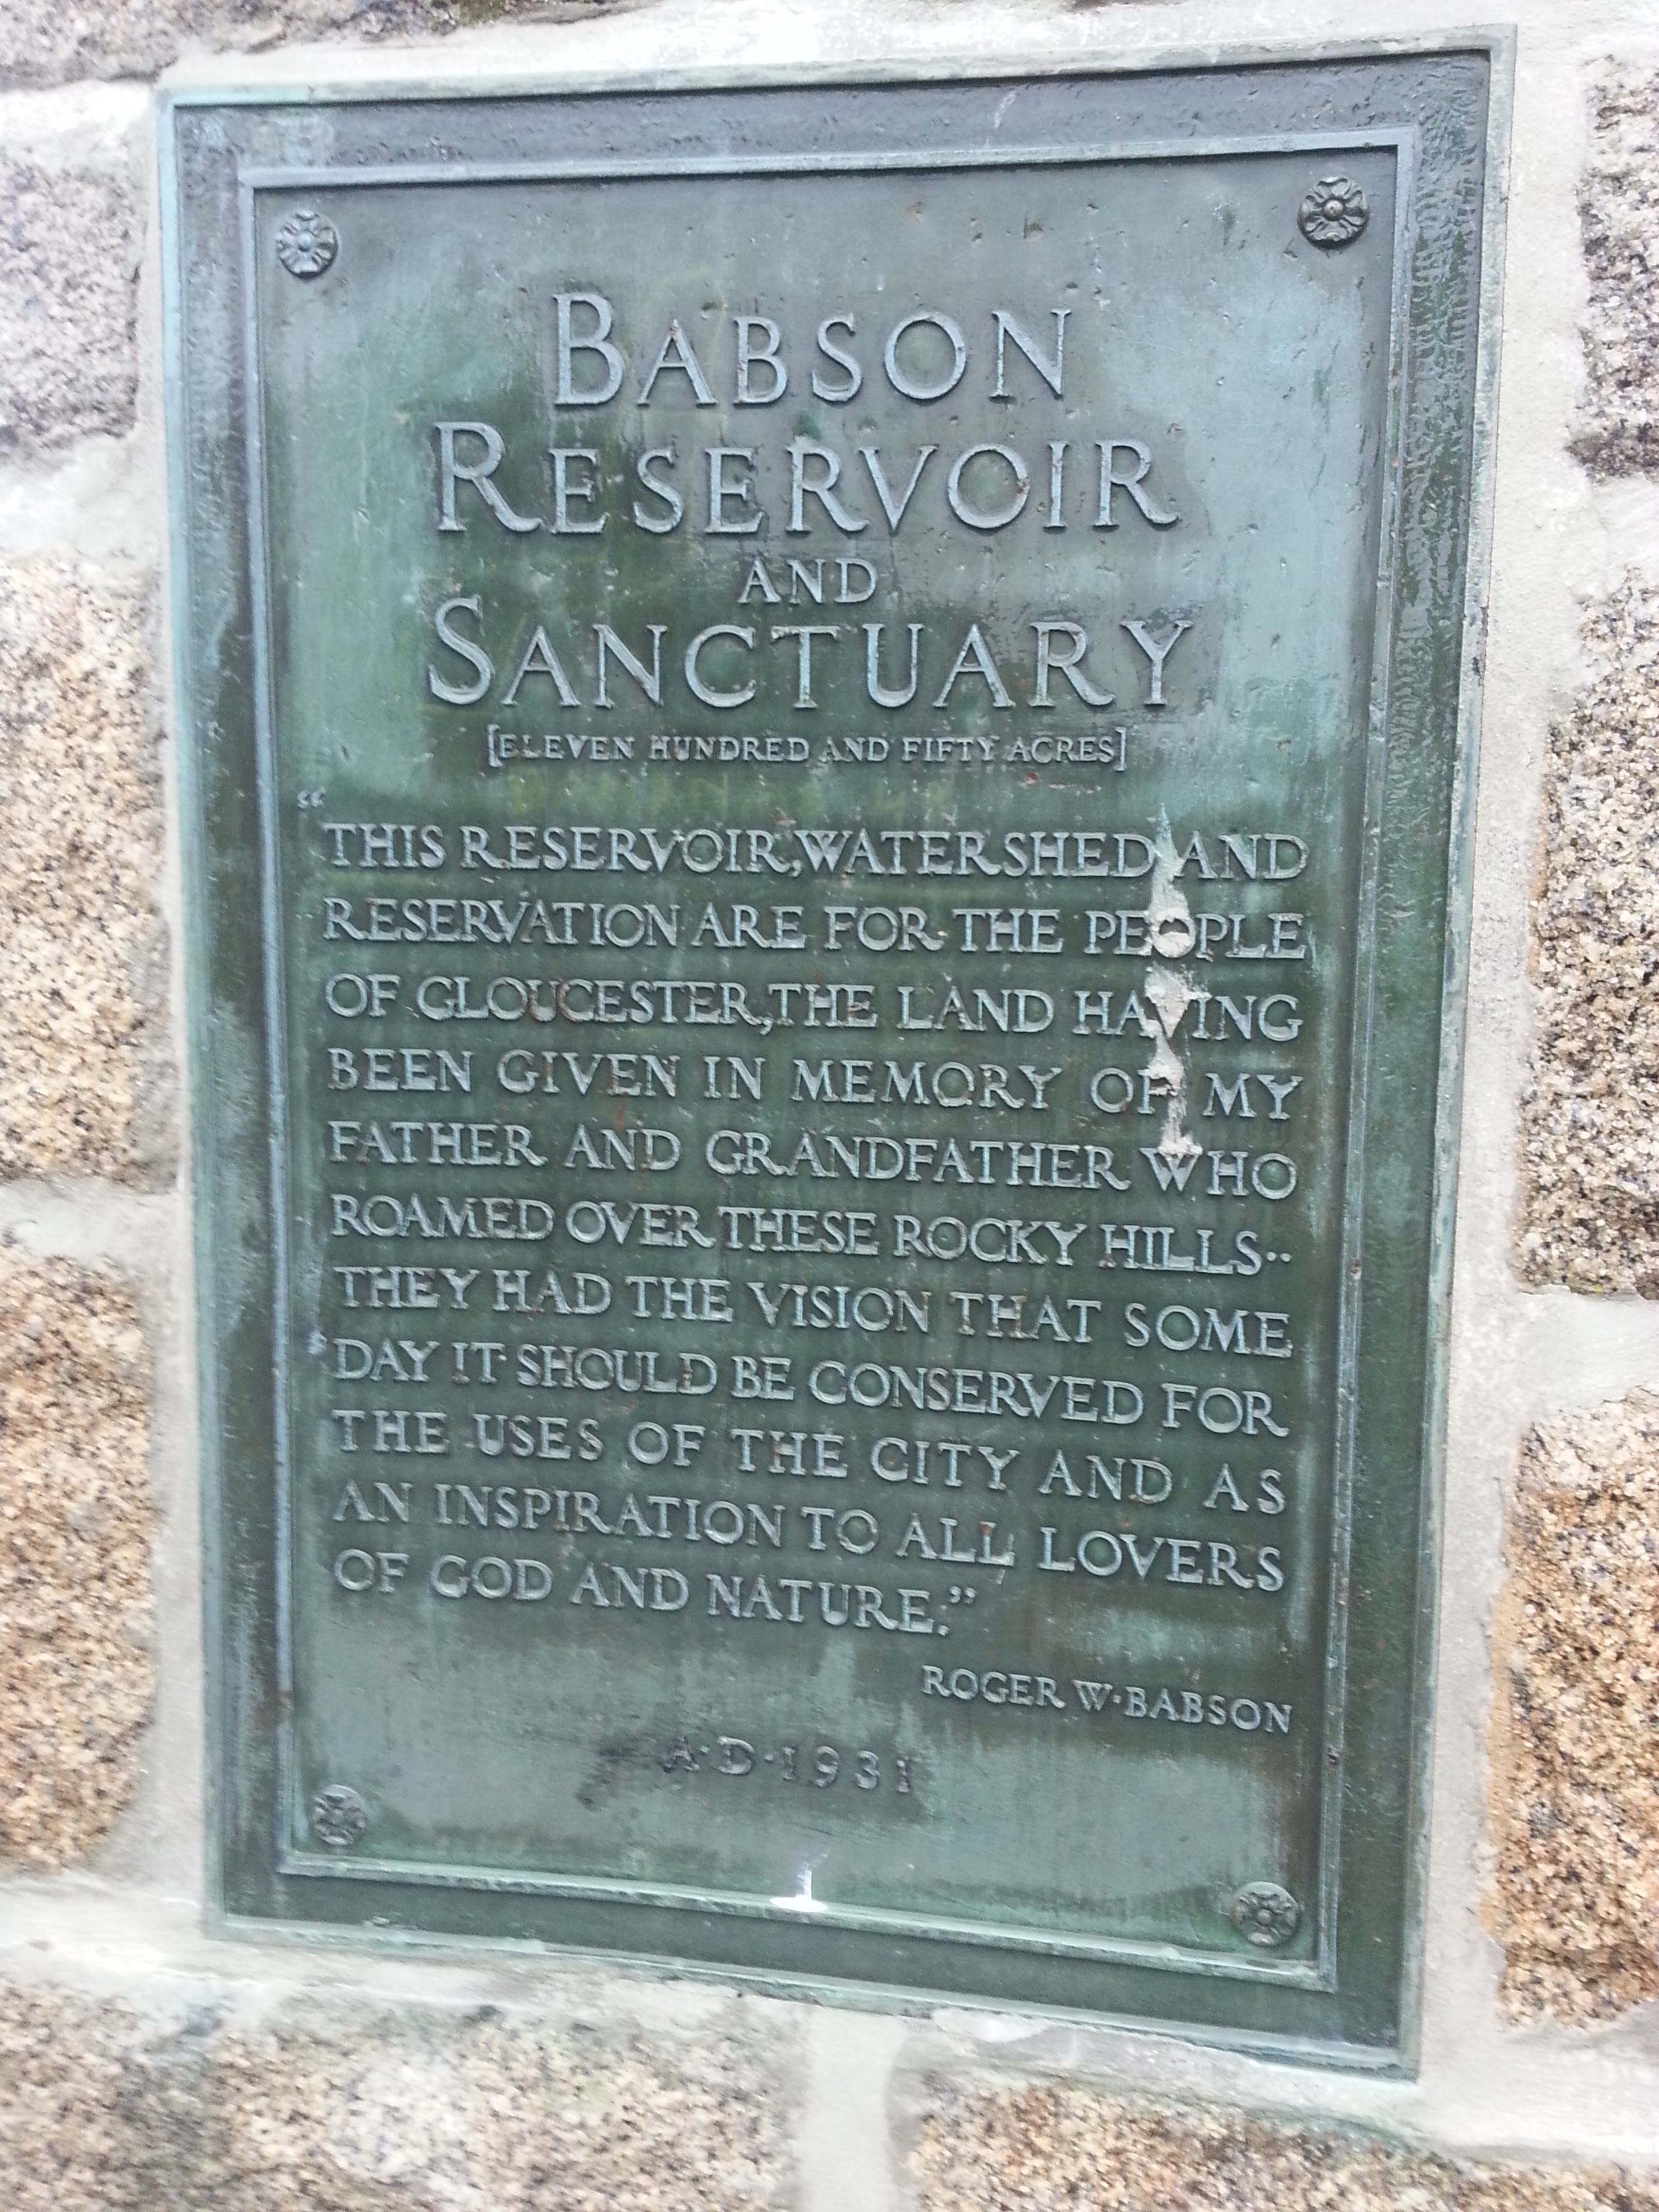 Babson Reservoir and Sanctuary 1931 dedication plaque Gloucester MA photograph 20160810_©catherine ryan